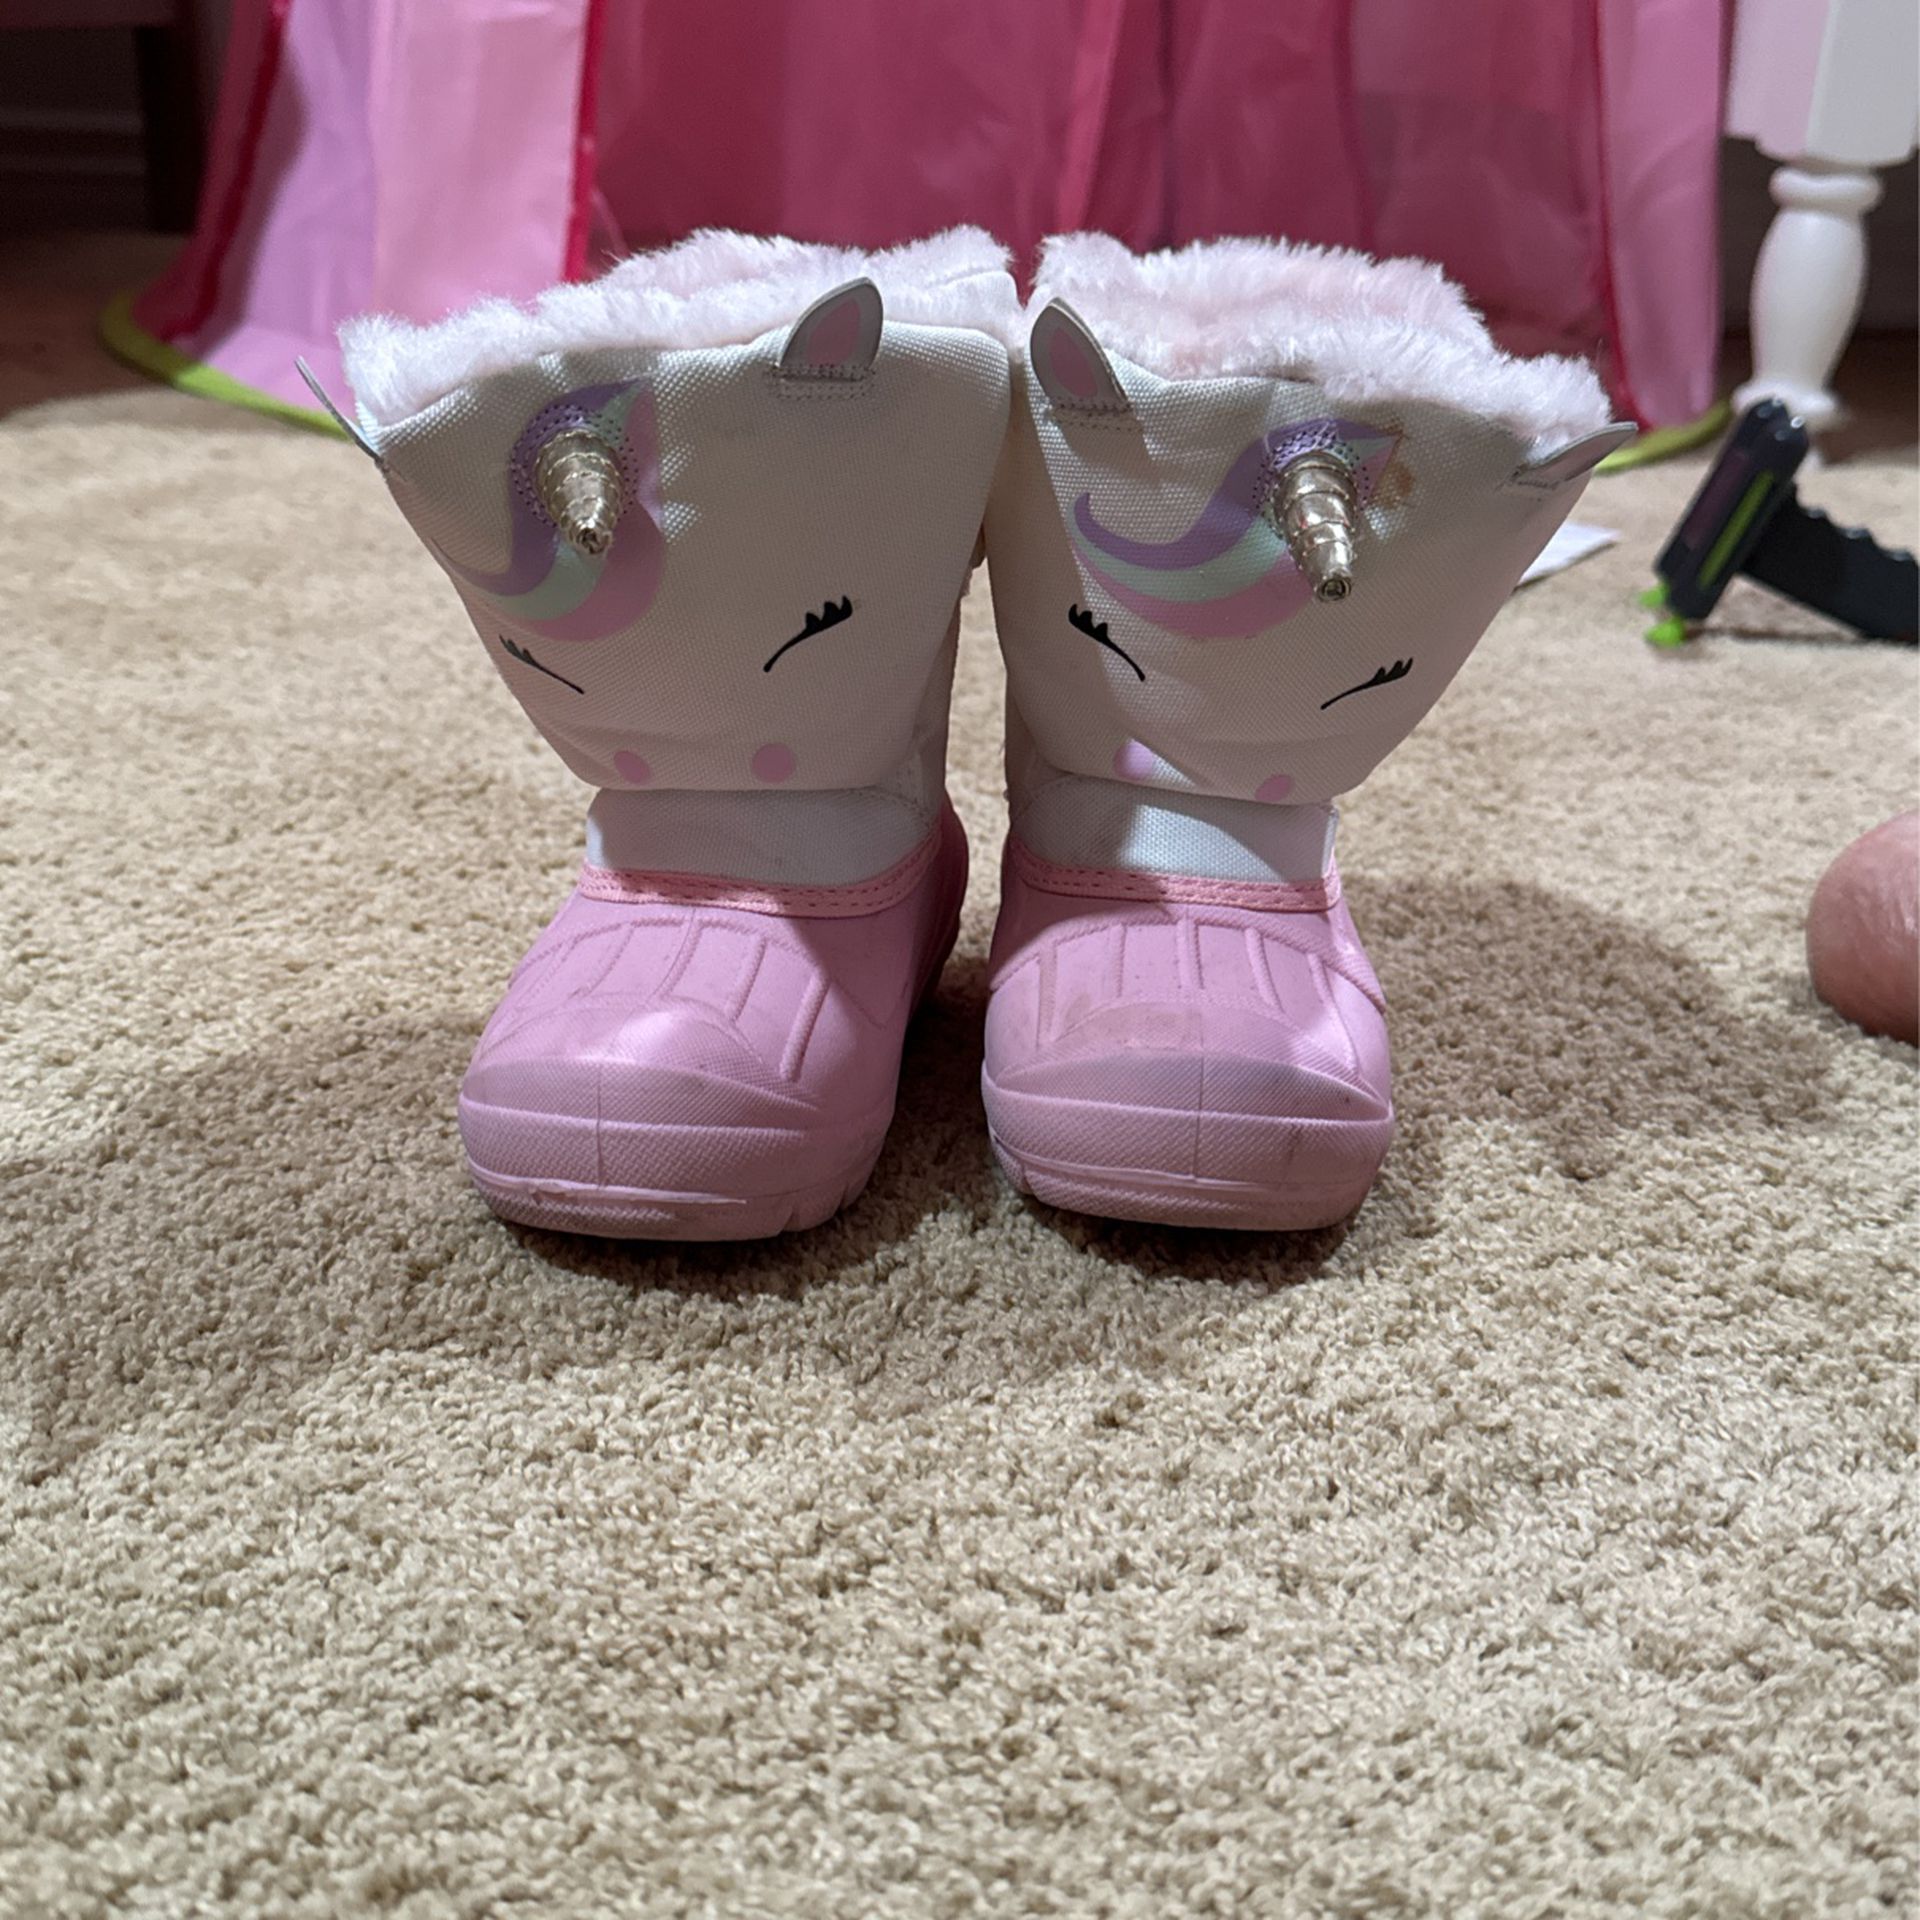 Toddler Size 6 Snow Boots